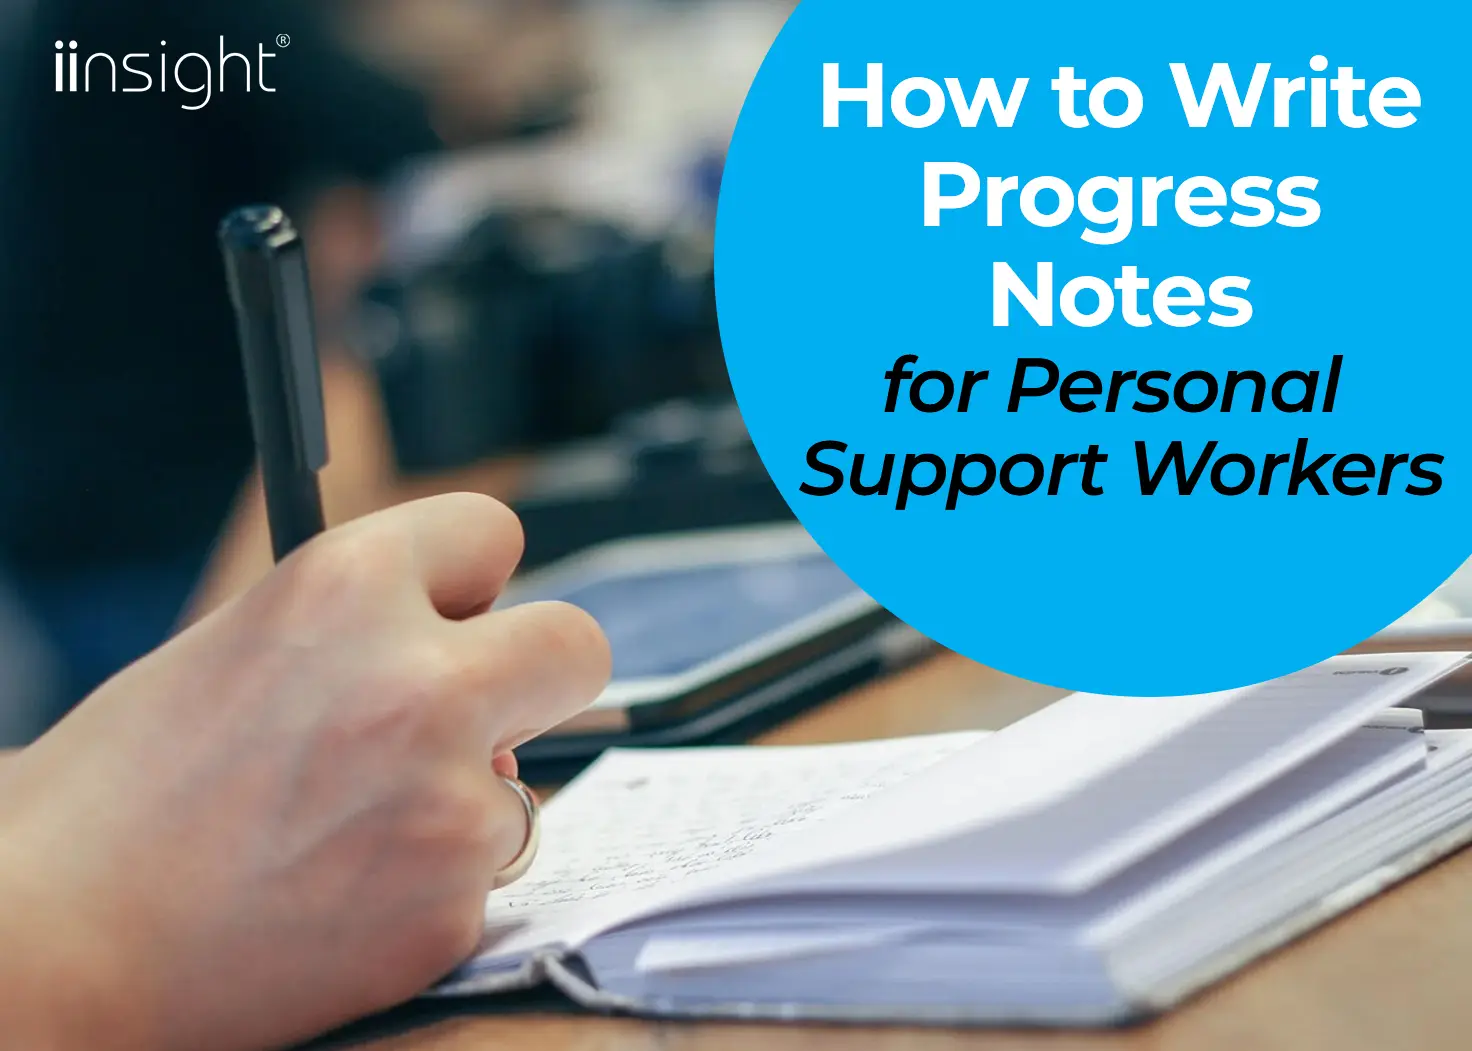 How to Write Progress Notes for Personal Support Workers